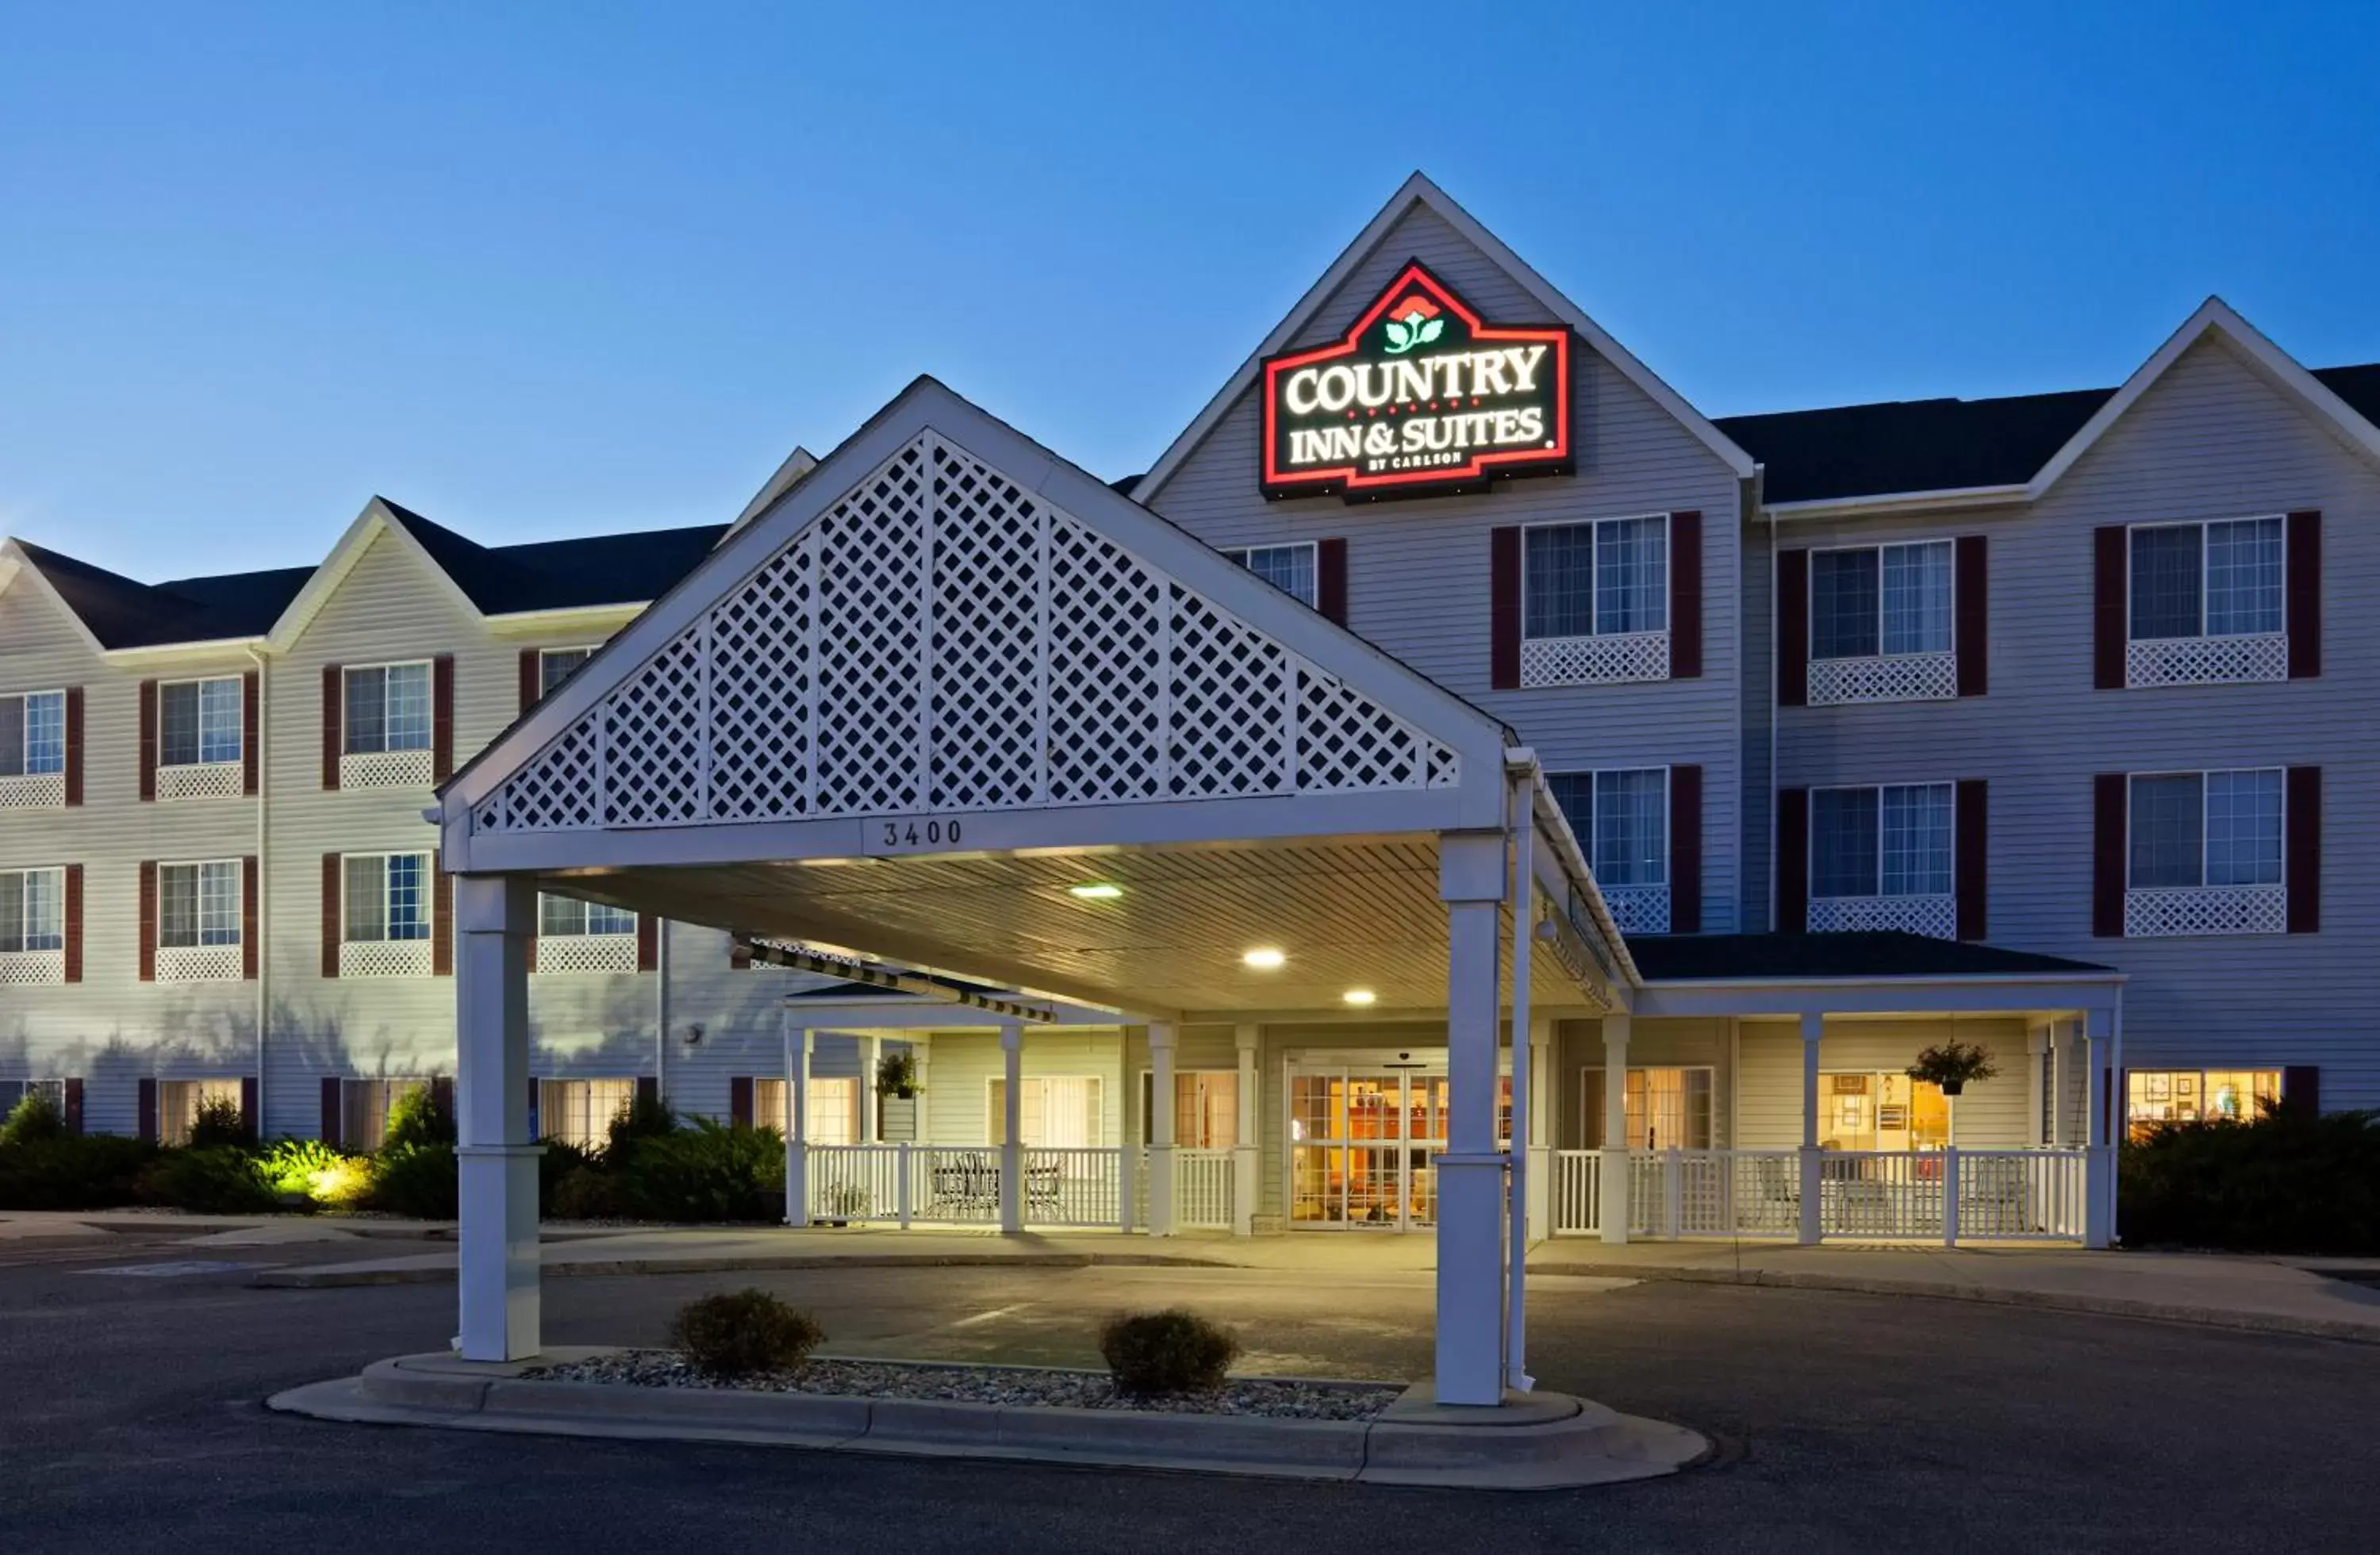 Facade/entrance, Property Building in Country Inn & Suites by Radisson, Watertown, SD